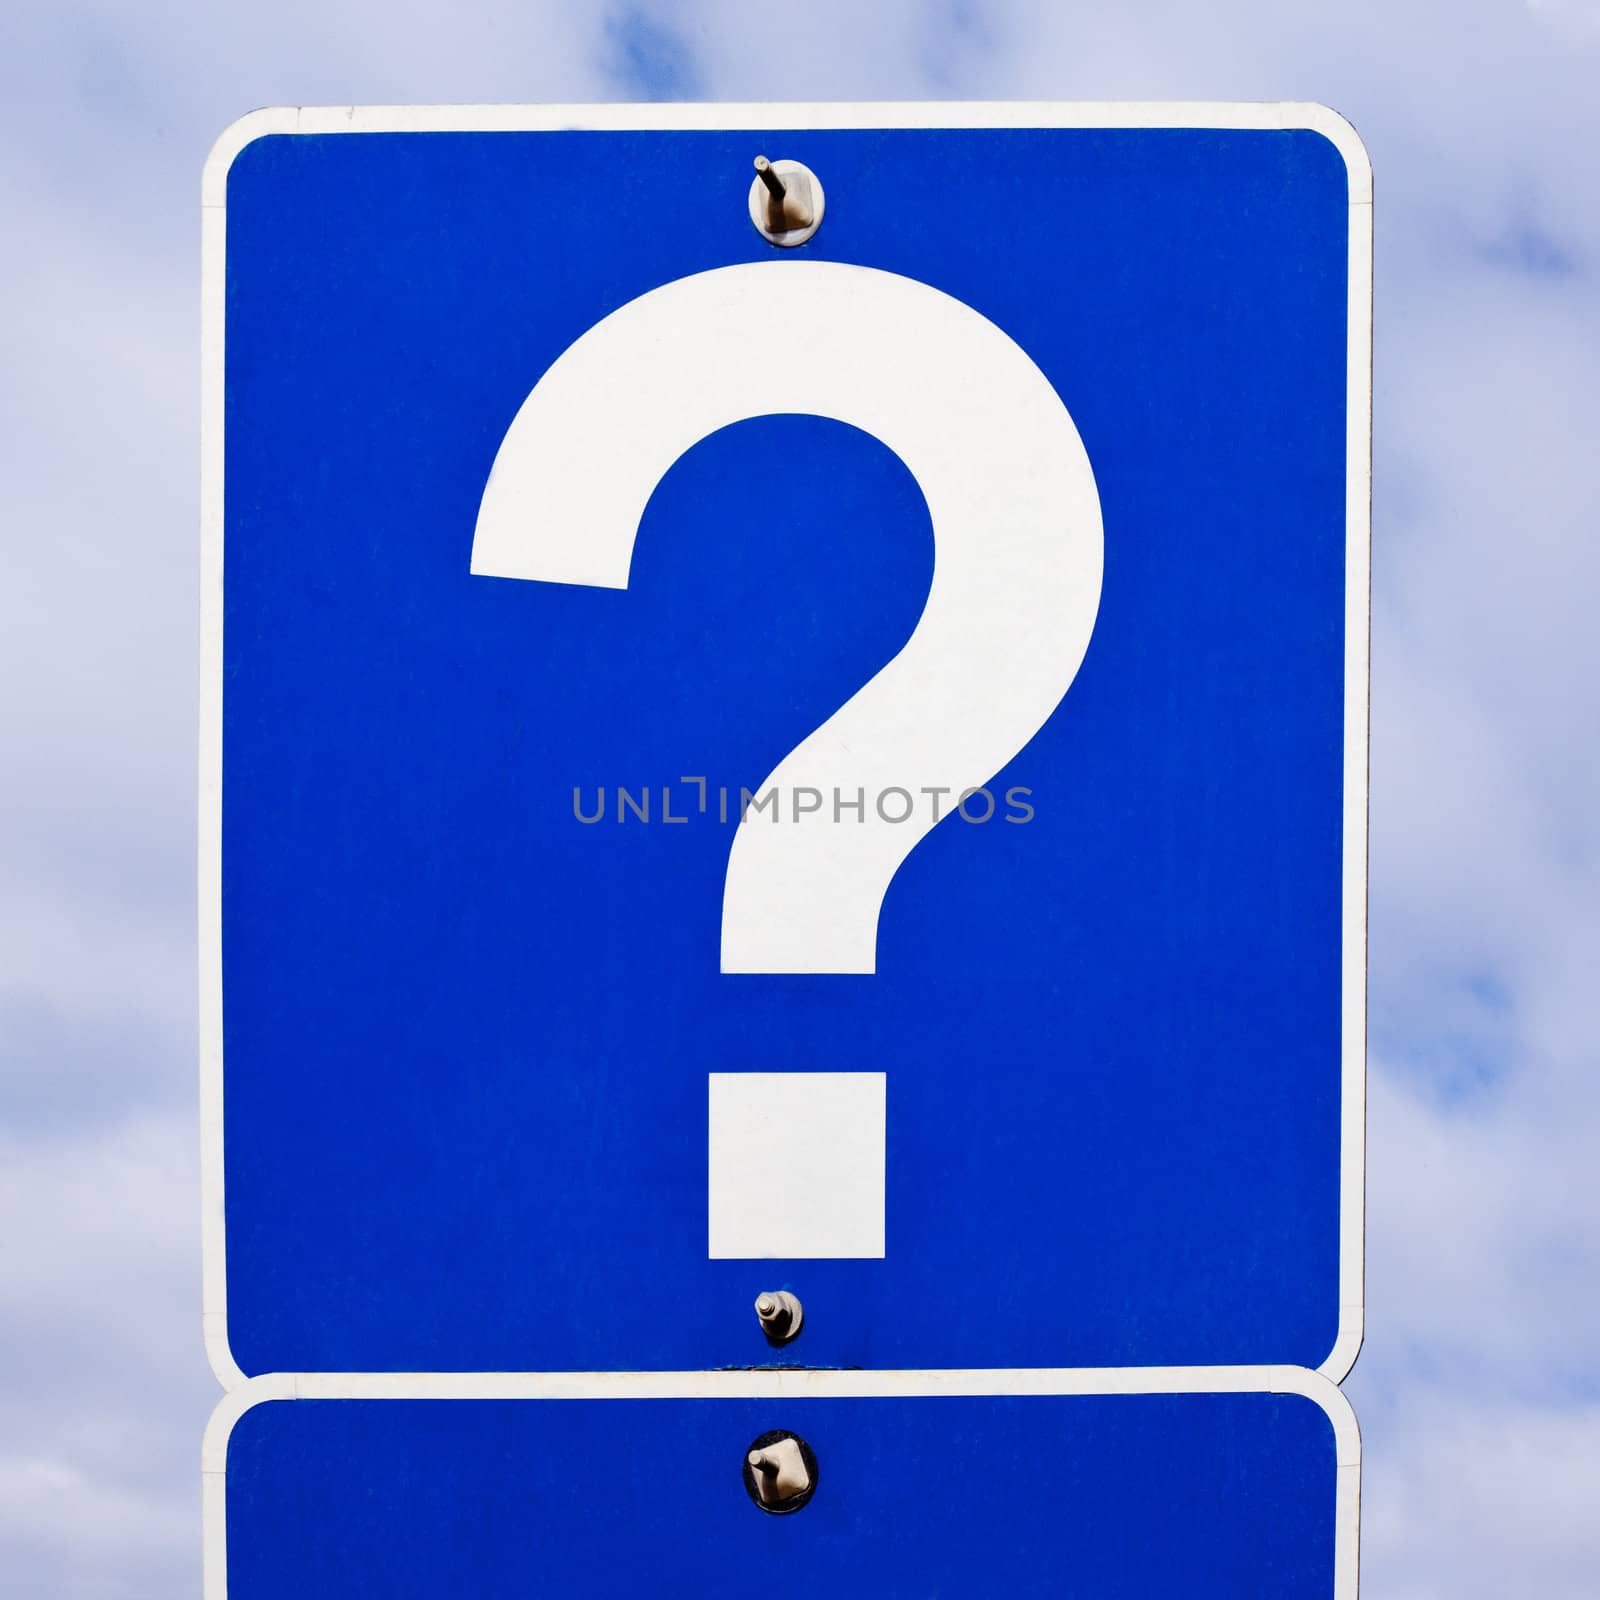 Blue road sign with just a single white question mark on it.